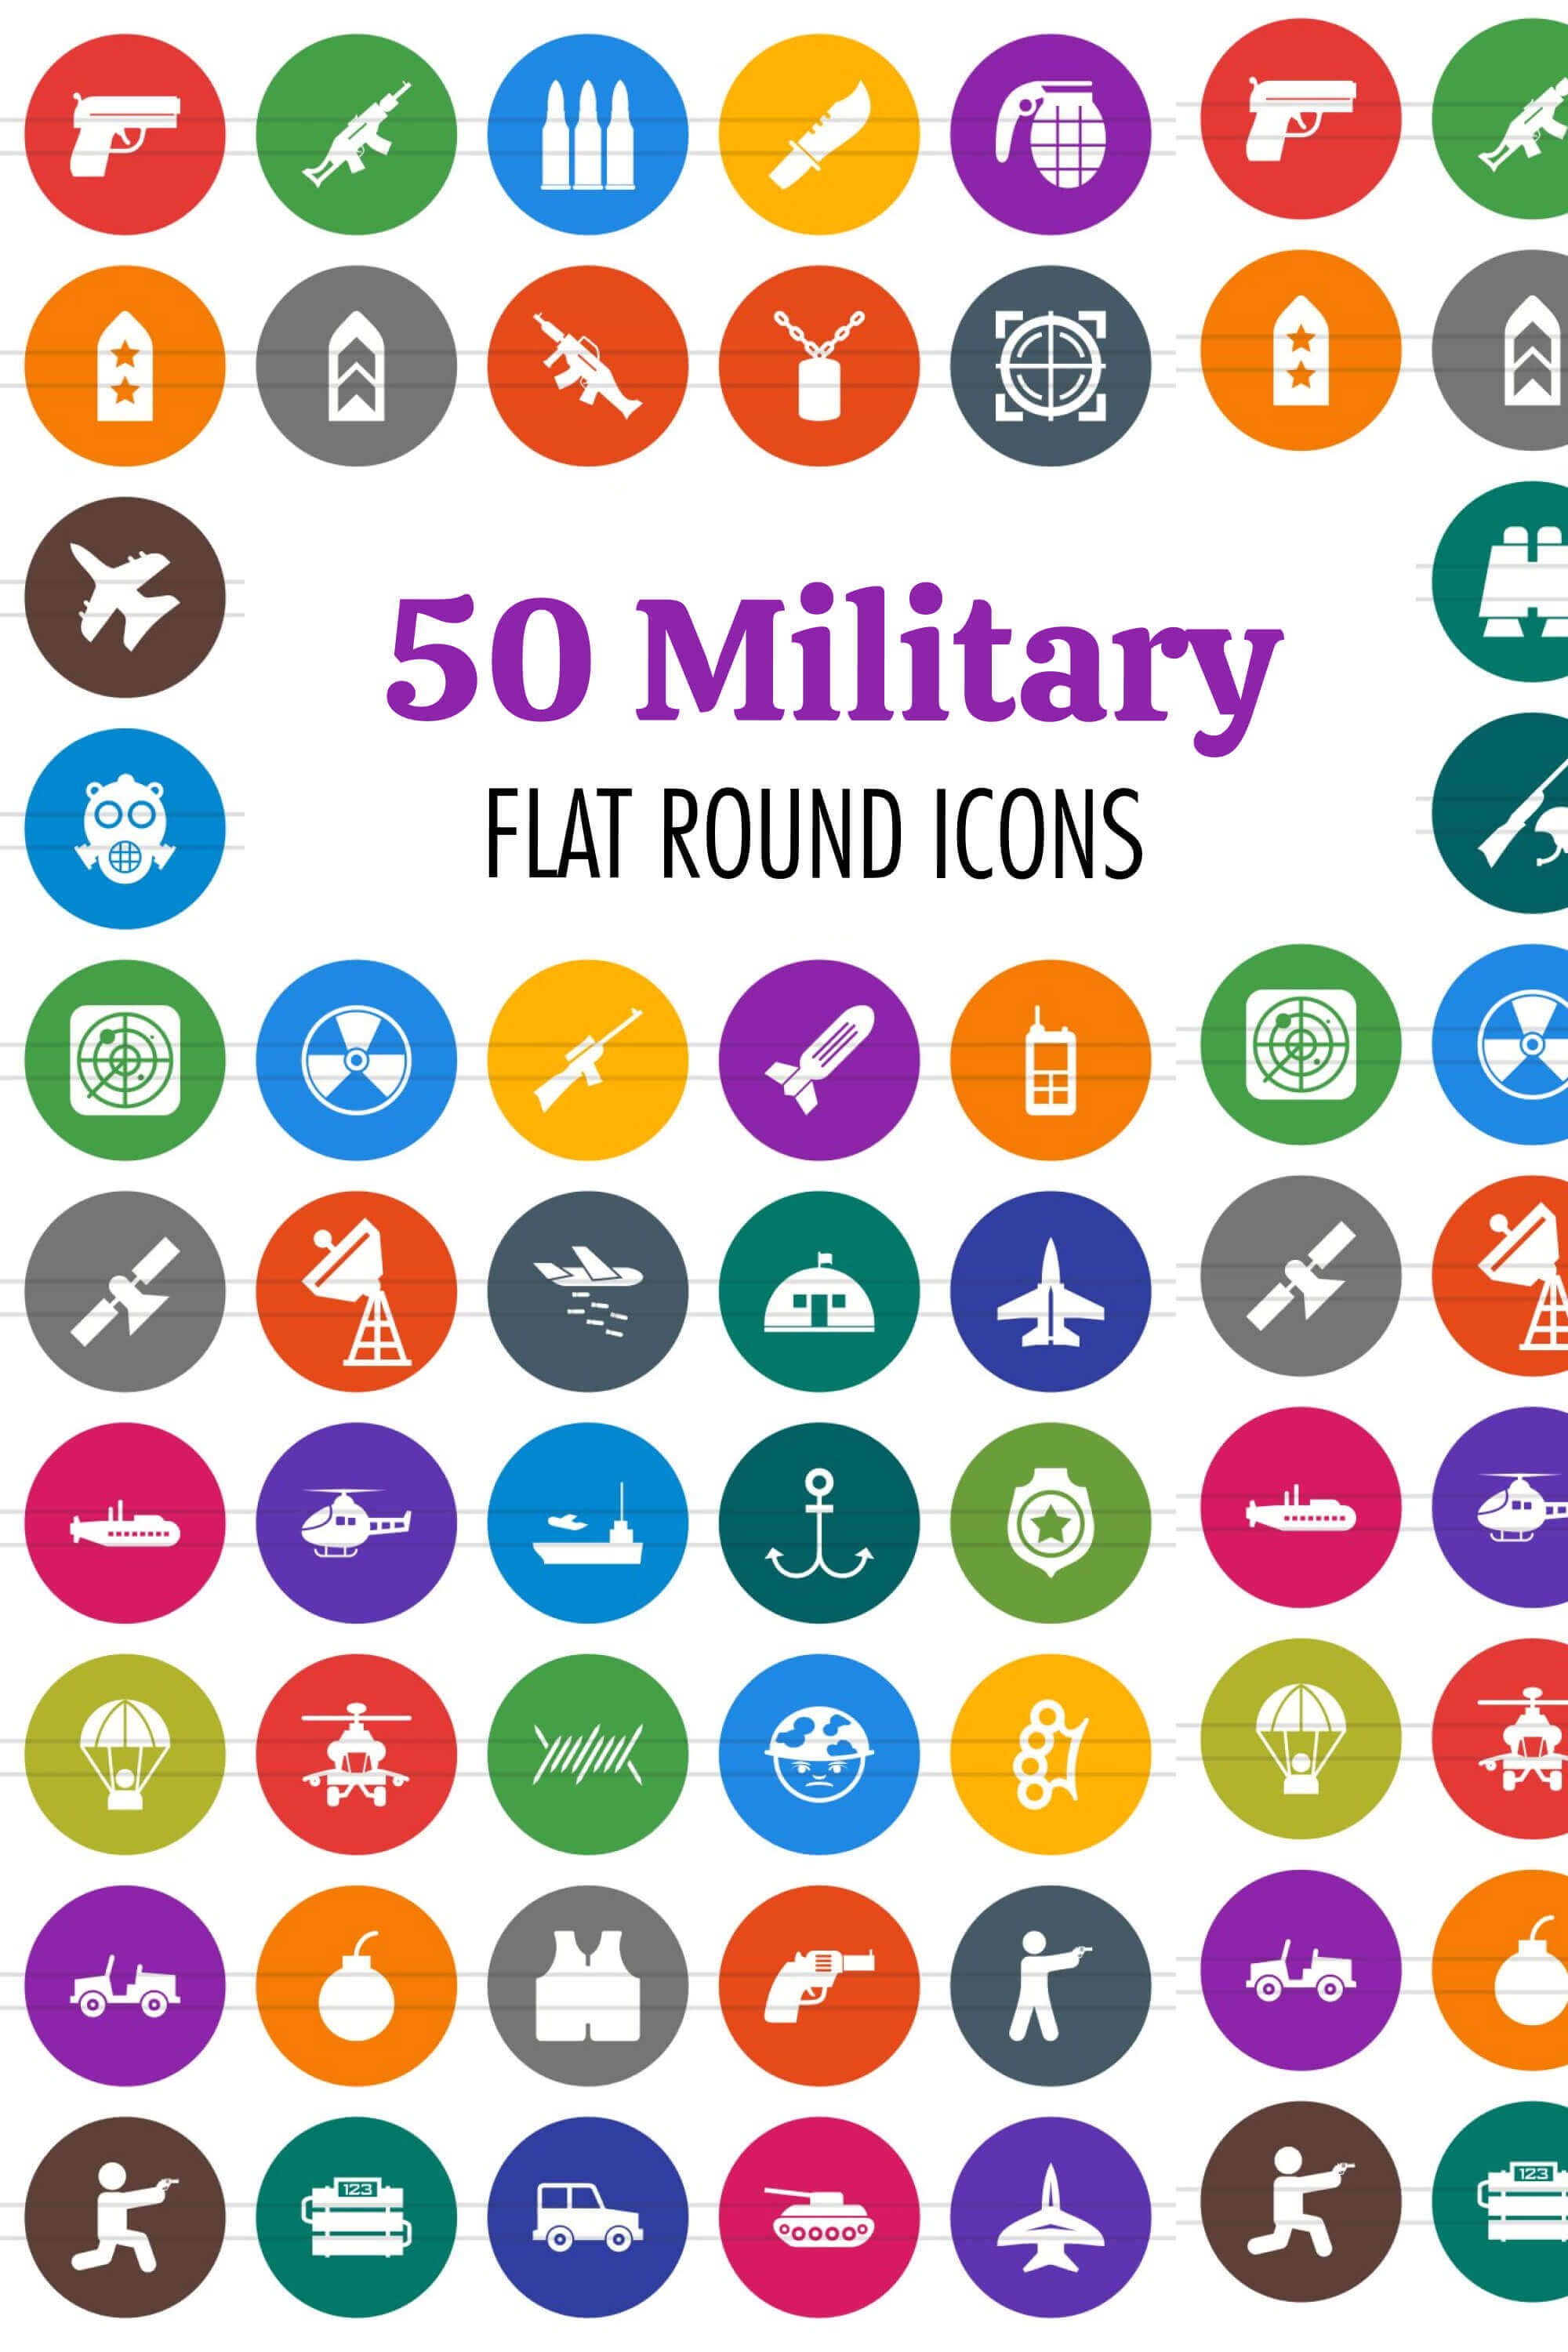 White bombs, white bullets and heavier equipment are represented by colored round icons.